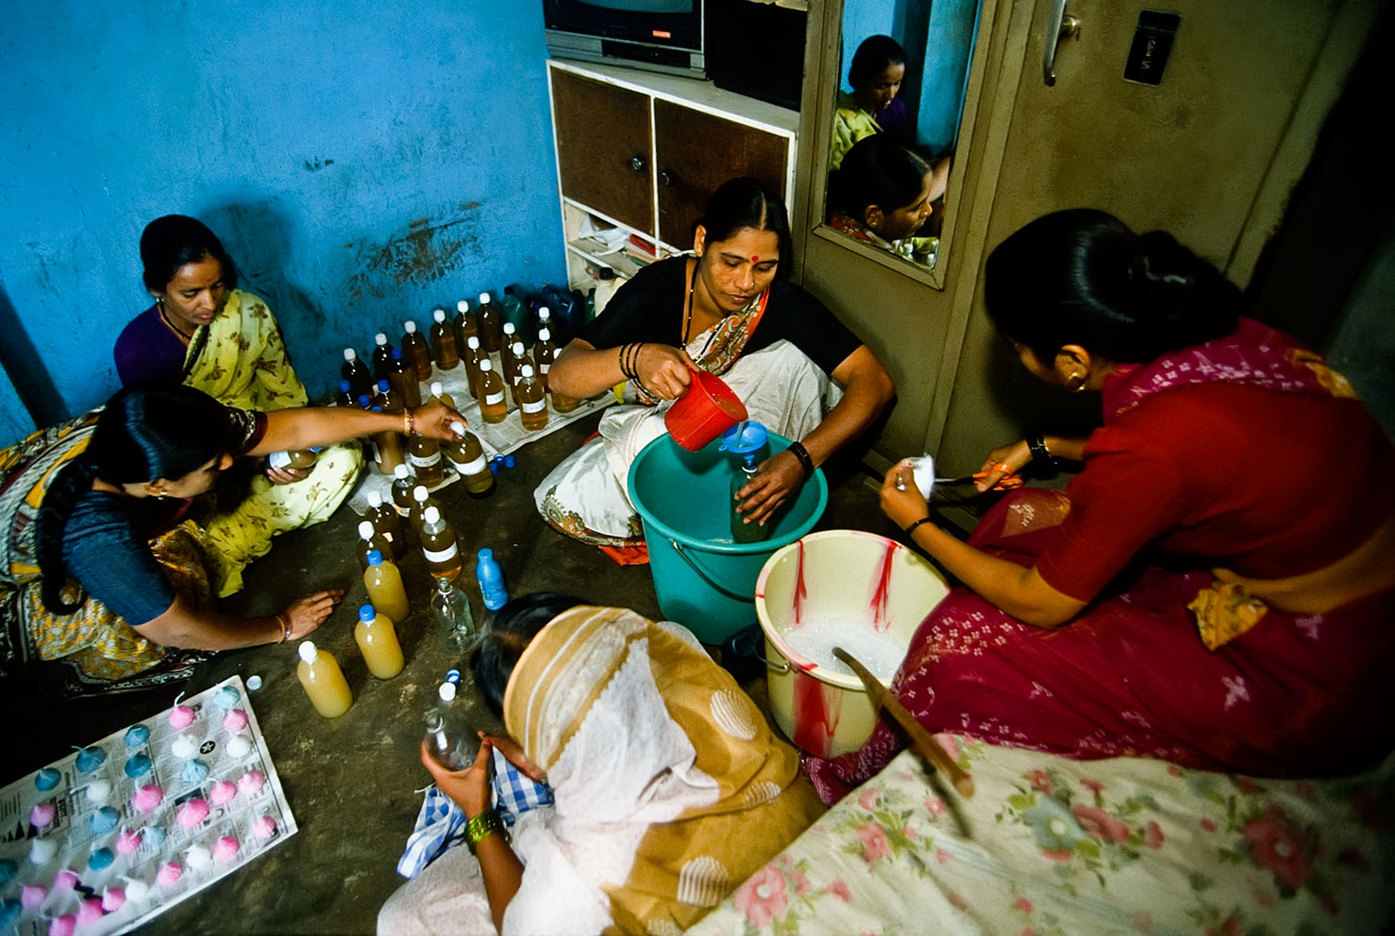 Microbusiness - women's candle-making enterprise in Kerala, India : BUSINESS & INDUSTRY : Viviane Moos |  Documentary Photographer